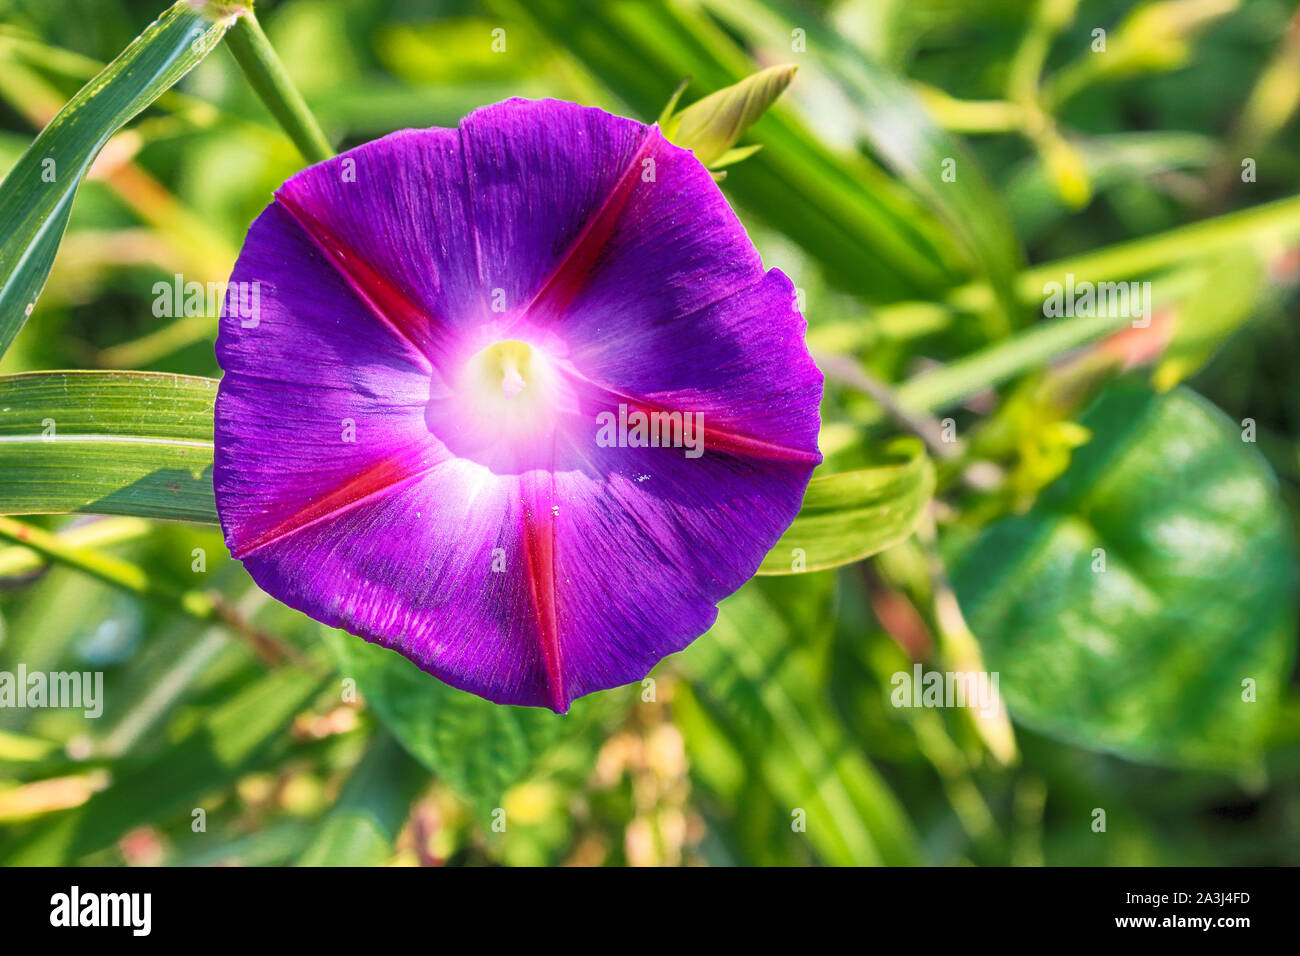 bindweed Convolvulus althaeoides or Bush Morning Glory flower Stock Photo